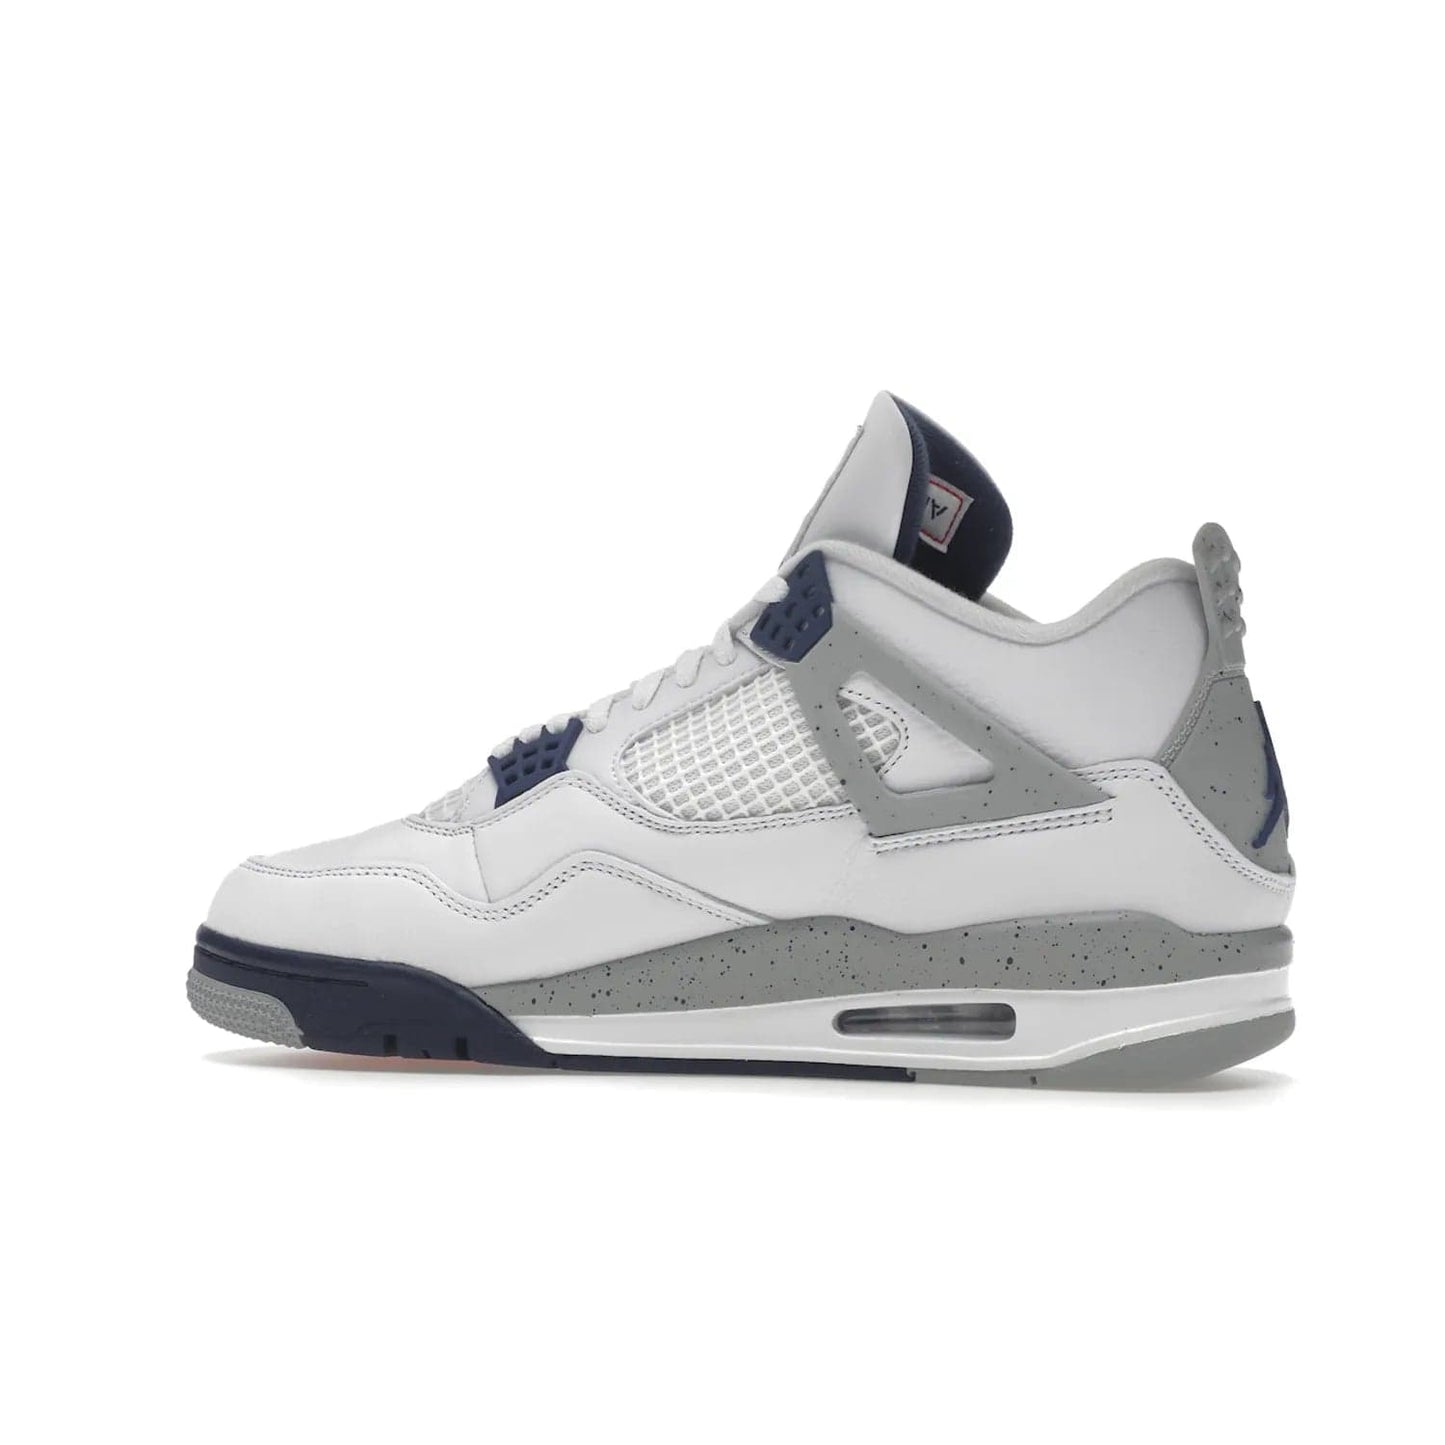 Jordan 4 Retro Midnight Navy - Image 21 - Only at www.BallersClubKickz.com - Shop the Air Jordan Retro 4 White Midnight Navy. Stand out with a classic white leather upper, black support wings, midnight navy eyelets, and Crimson Jumpman tongue tag. Unbeatable comfort with two-tone polyurethane midsole with encapsulated Air technology. Get yours before October 29th, 2022.